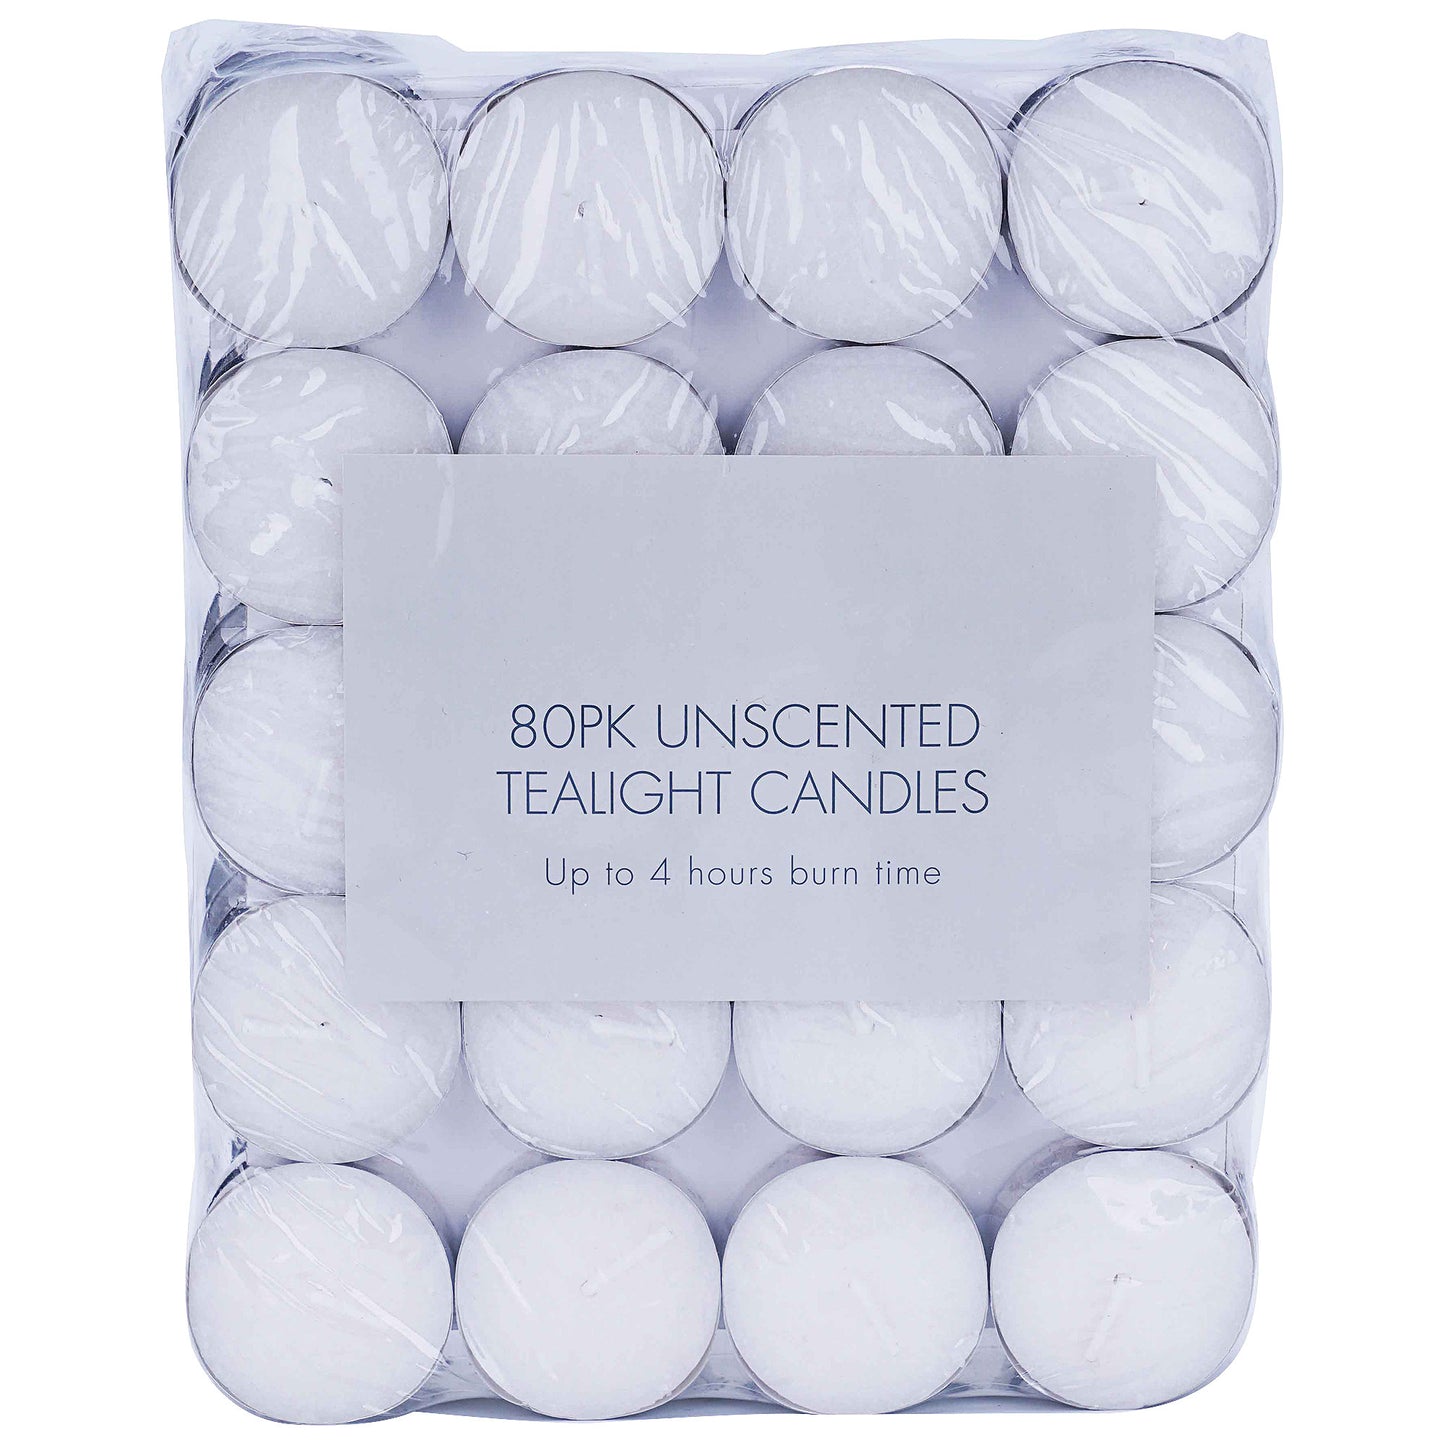 Tealight Candles Unscented 80pk